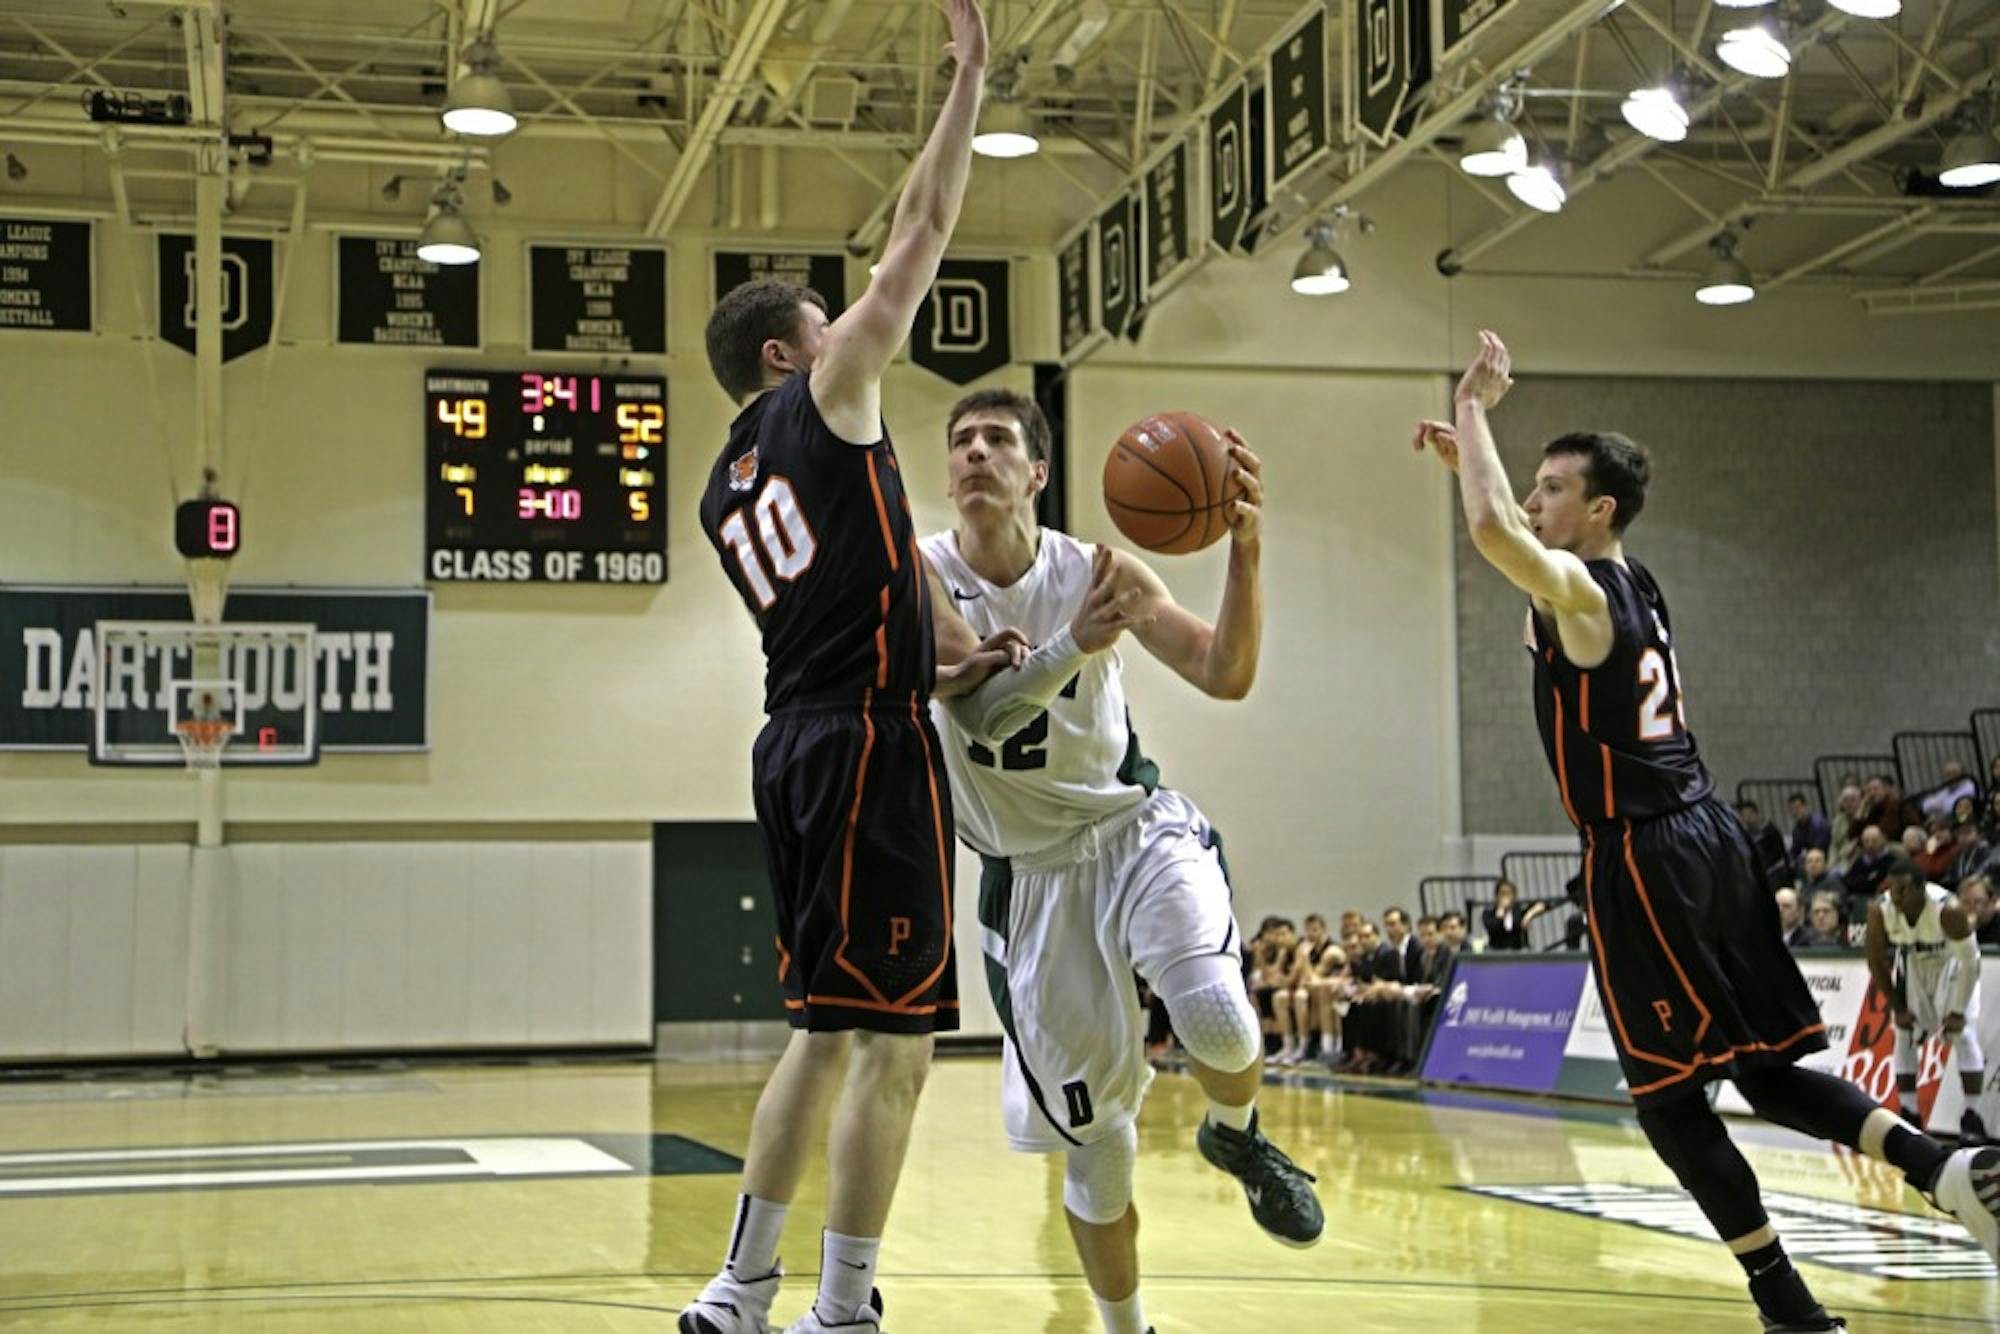 The men’s basketball team ended its regular season with home wins over Brown and Yale Universities.